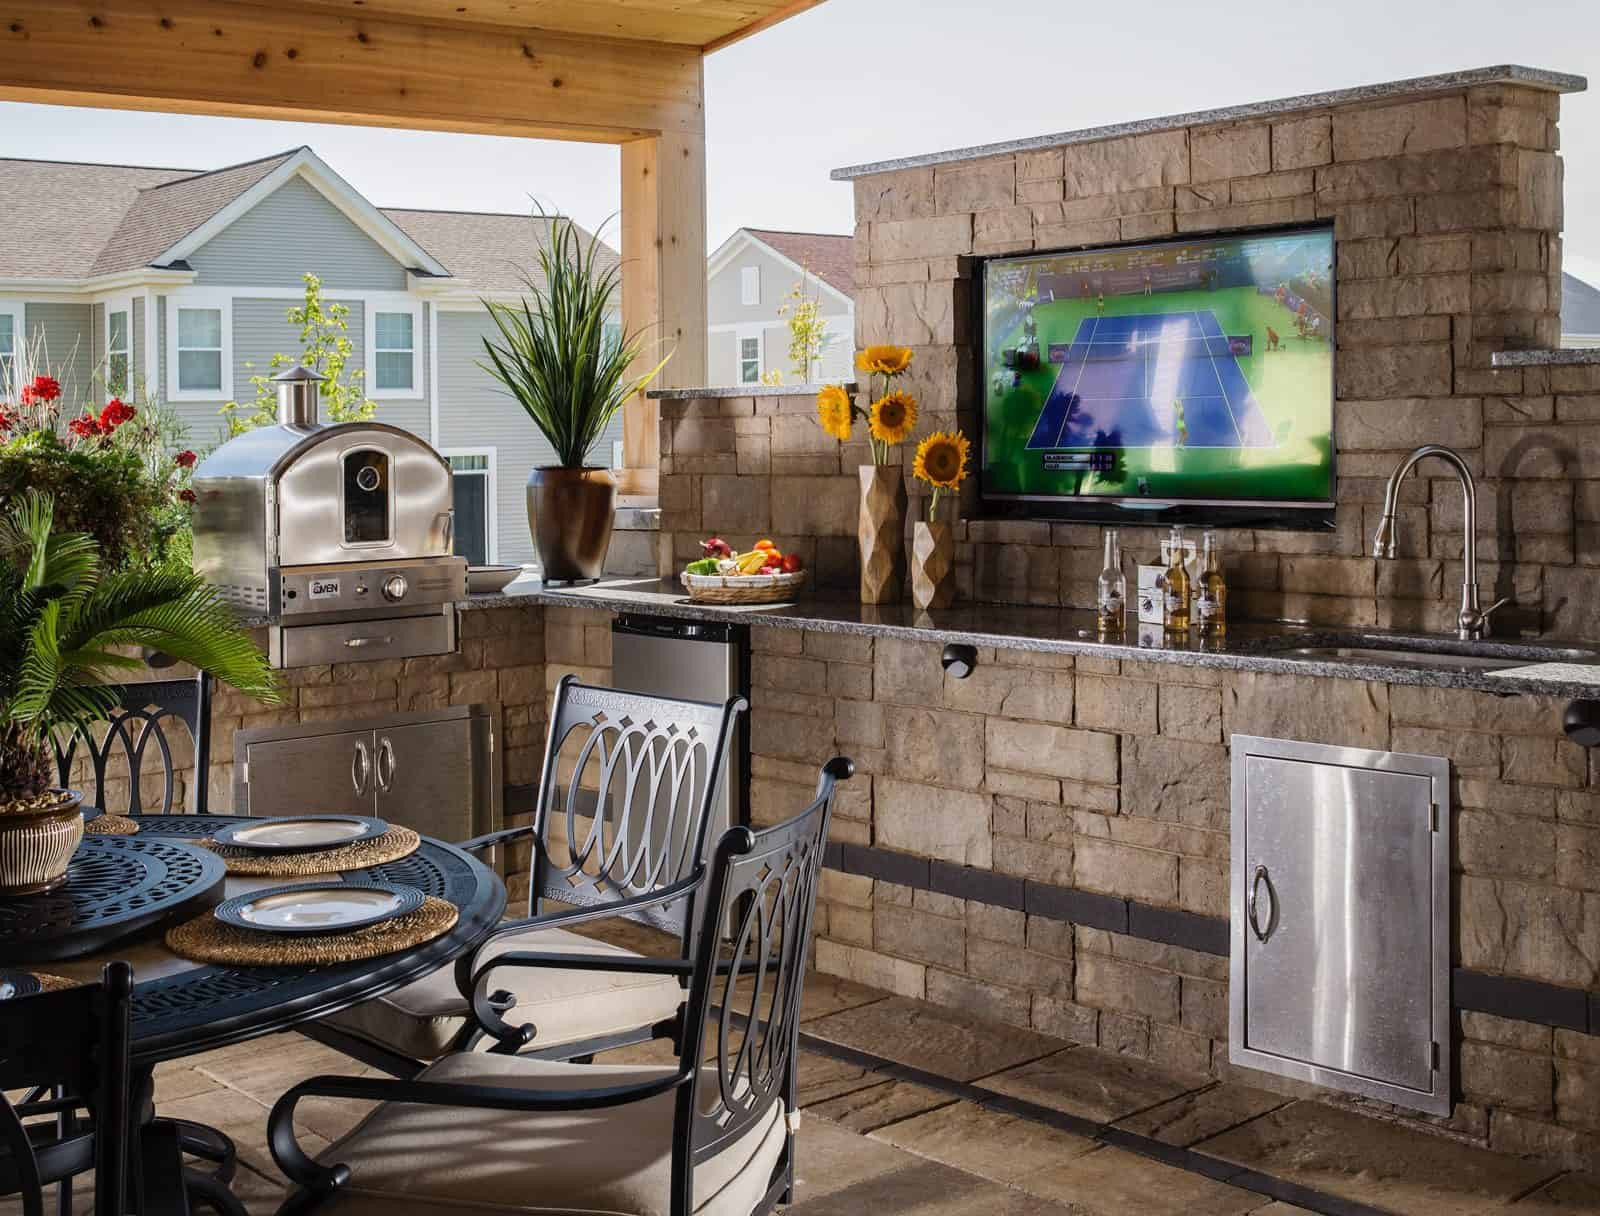 Outdoor Kitchen Pictures
 Outdoor Kitchen Ideas That Will Make You Drool